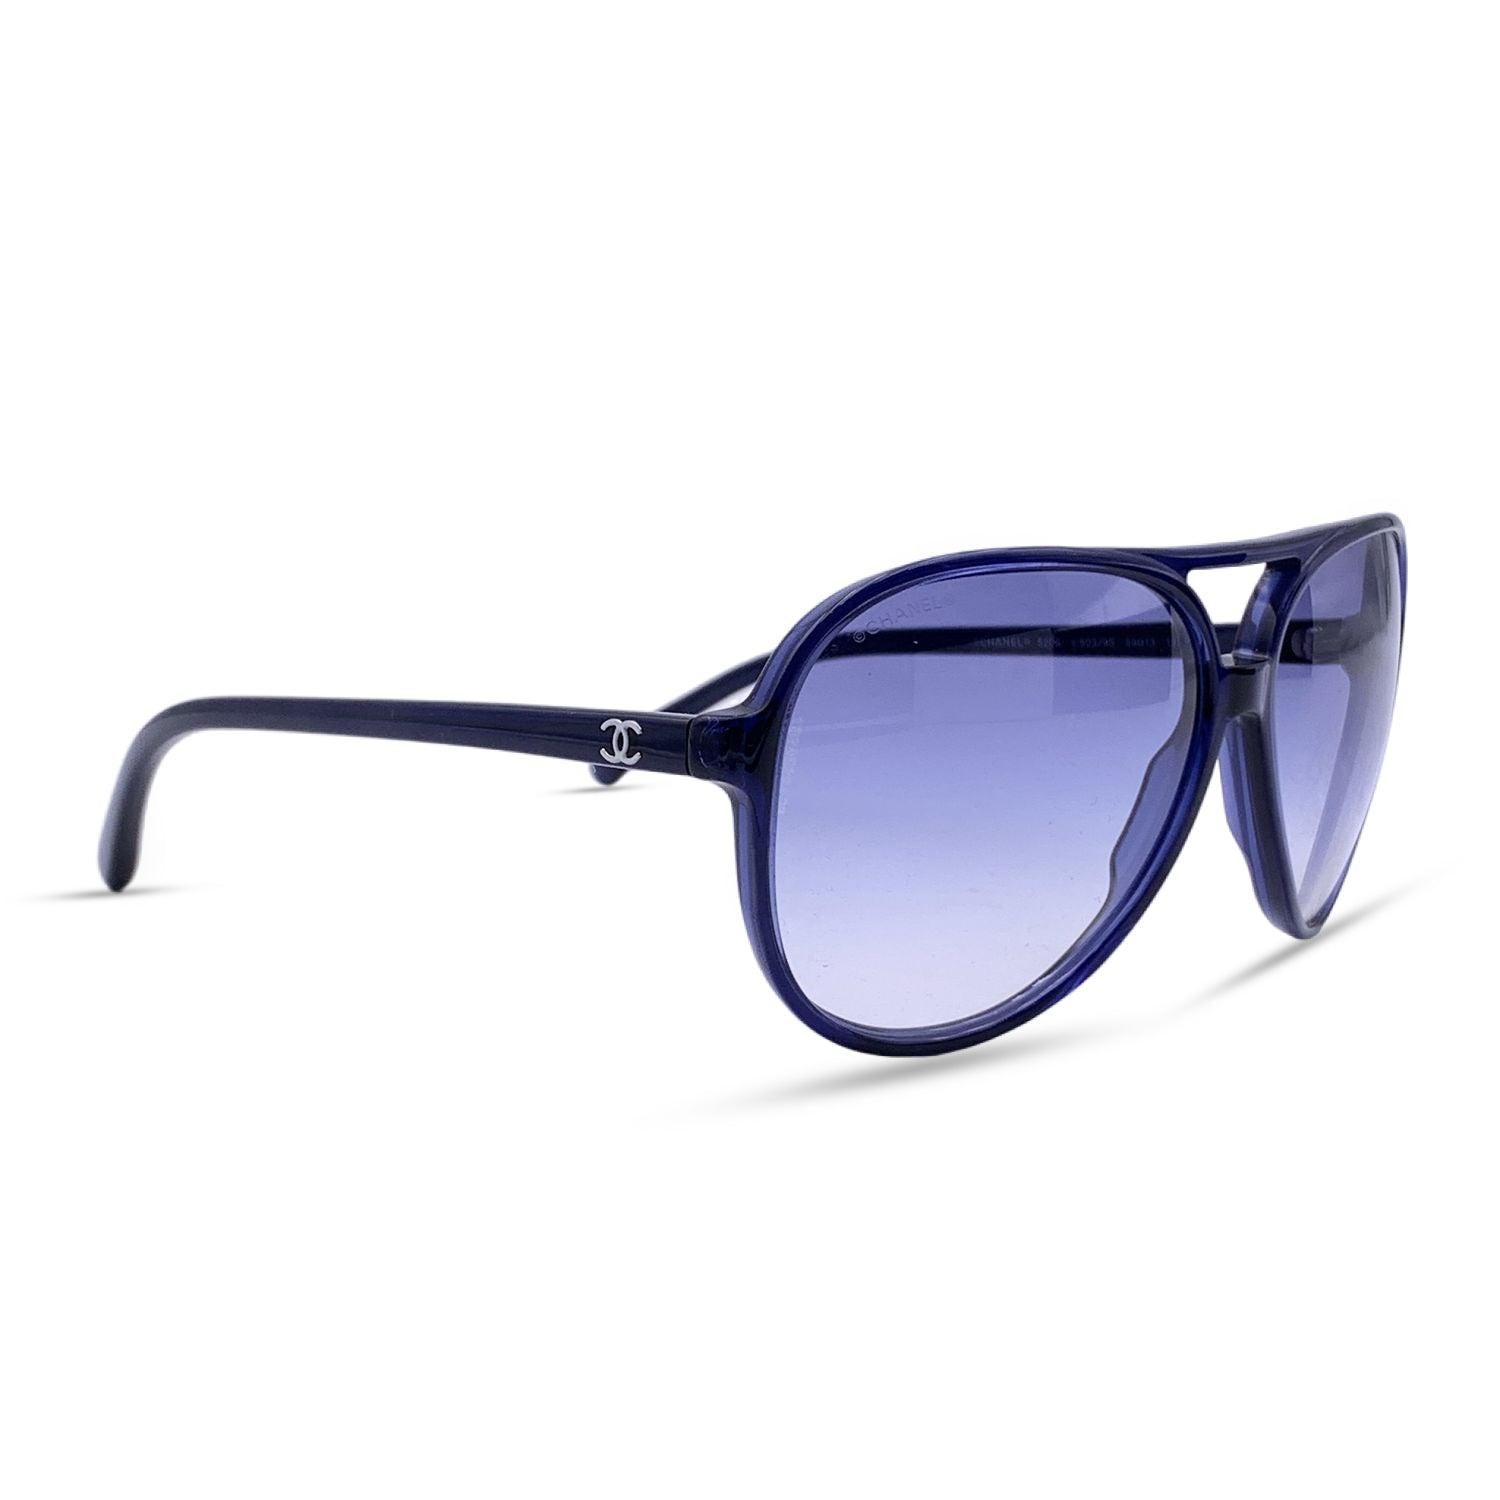 Chanel Blue Acetate Aviator Sunglasses 5206 59/13 135 mm In Excellent Condition In Rome, Rome